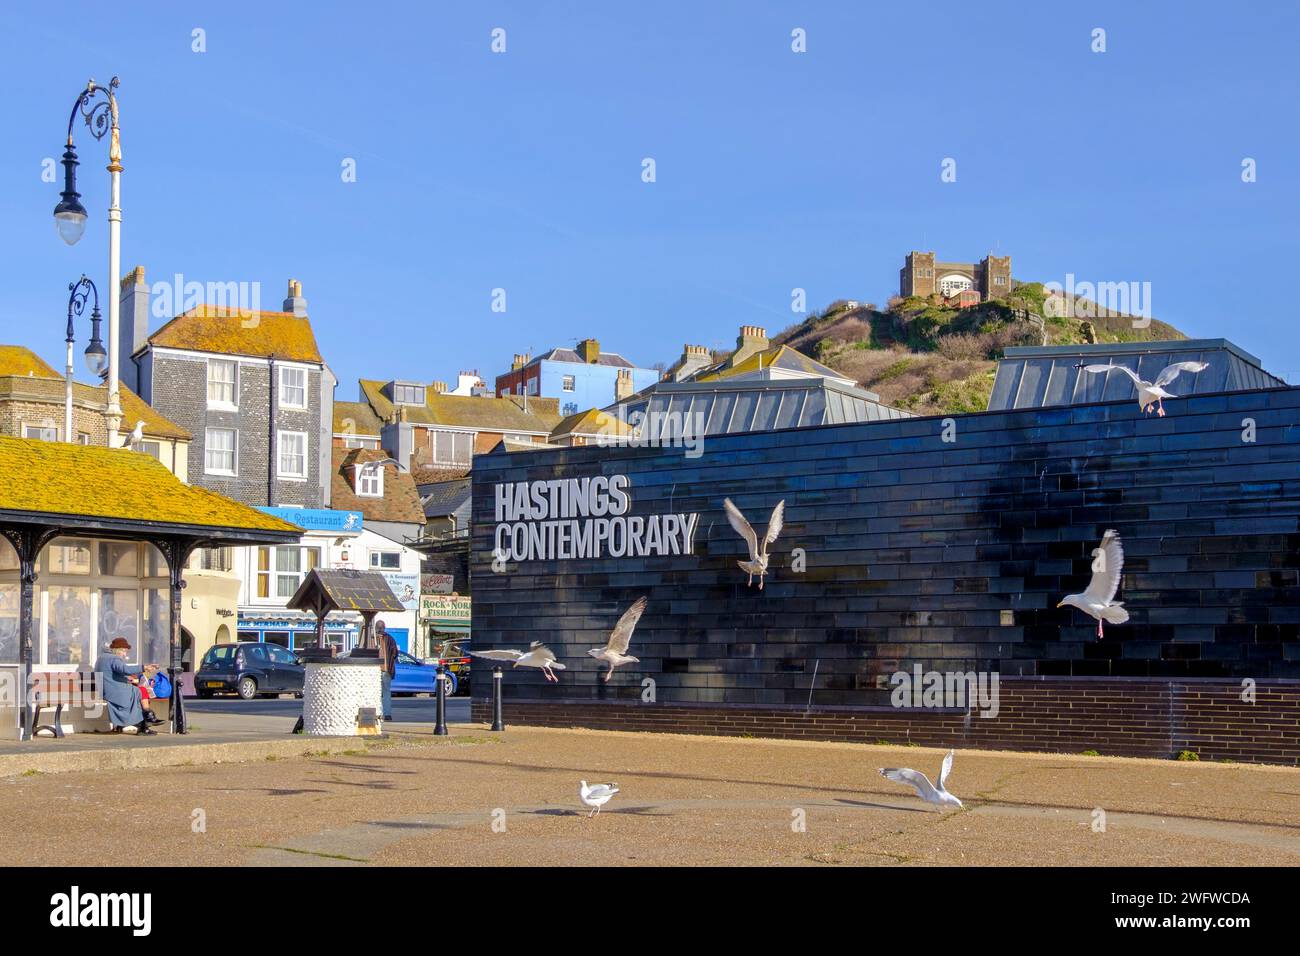 Hastings Contemporary Art Gallery, Rock-a-Nore, East Sussex, Royaume-Uni Banque D'Images